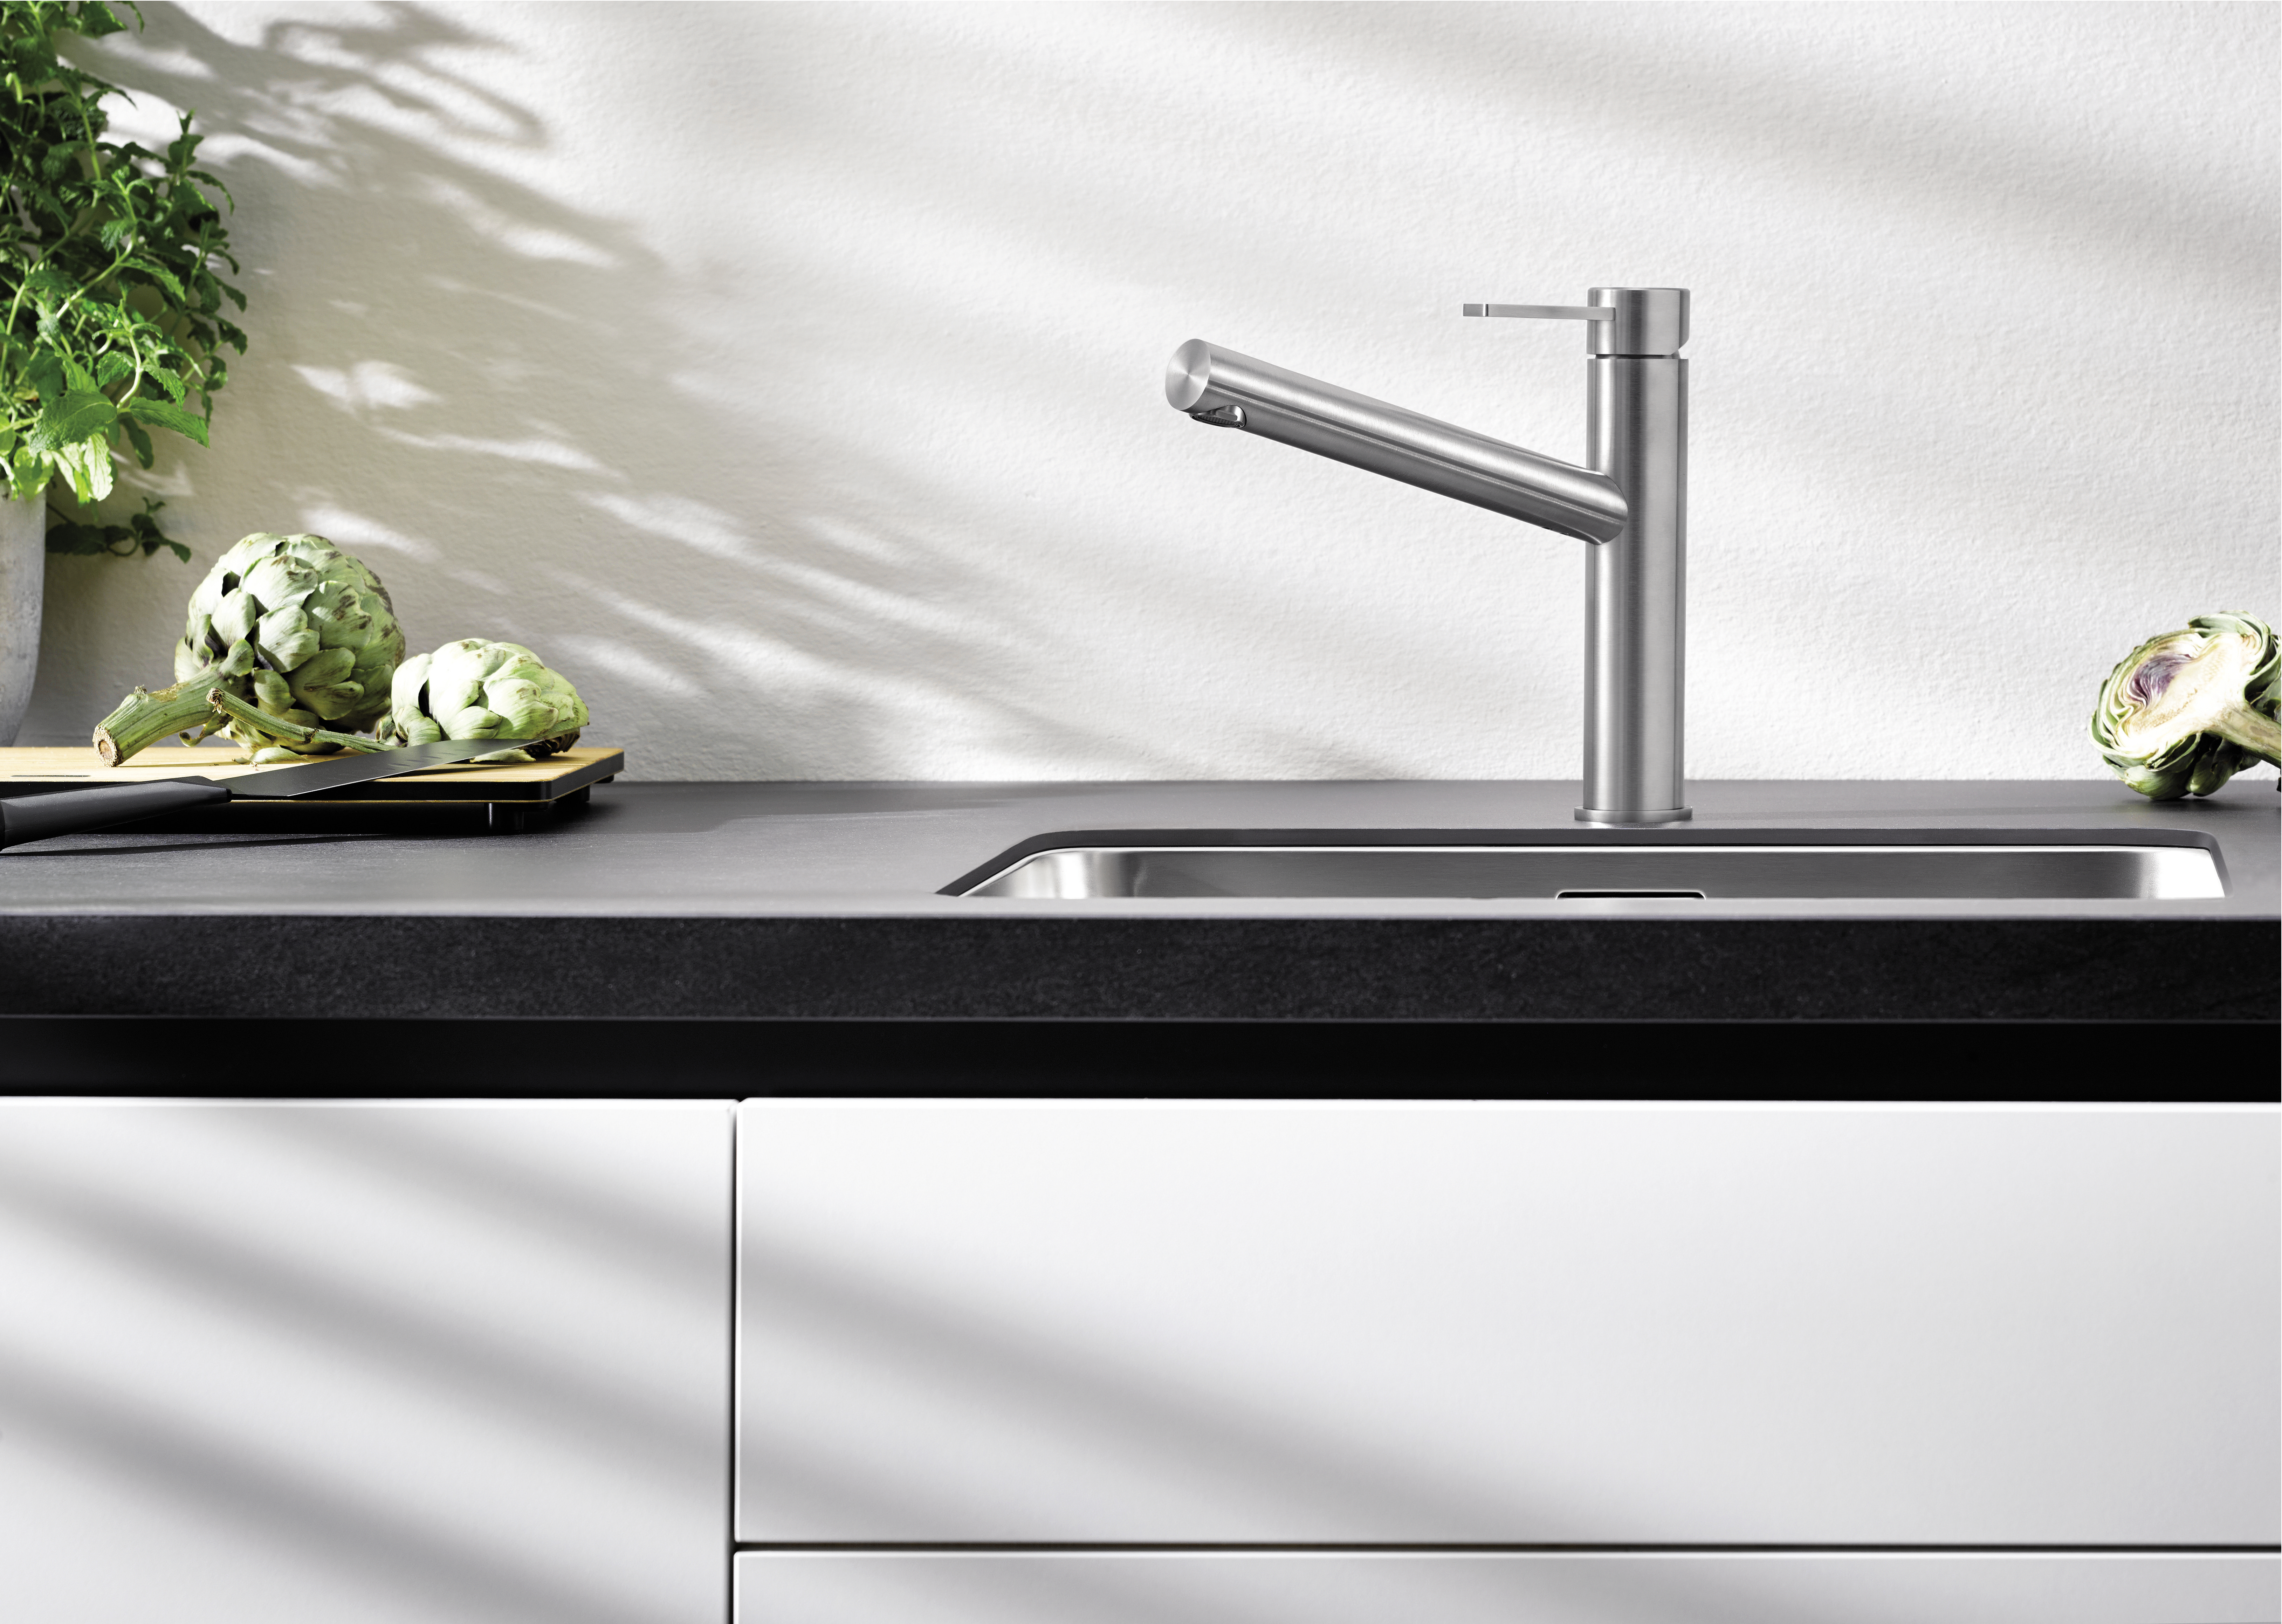 How to recognise a high-quality mixer tap